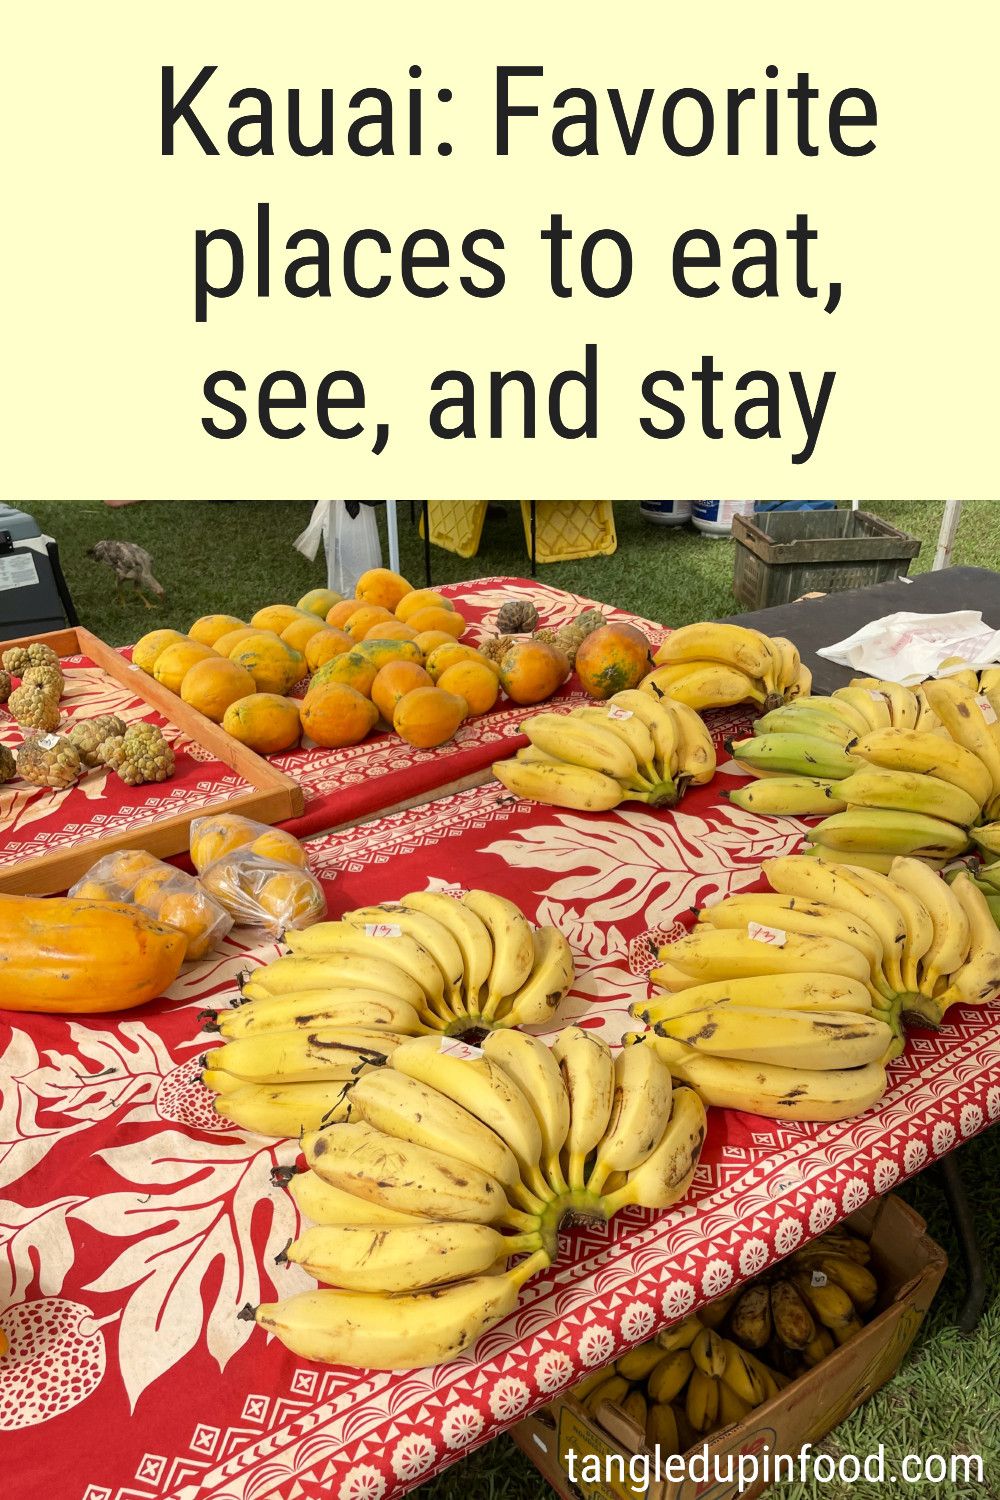 Photo of table with a display of fresh fruit with text reading "Kauai: Favorite places to eat, see, and stay"